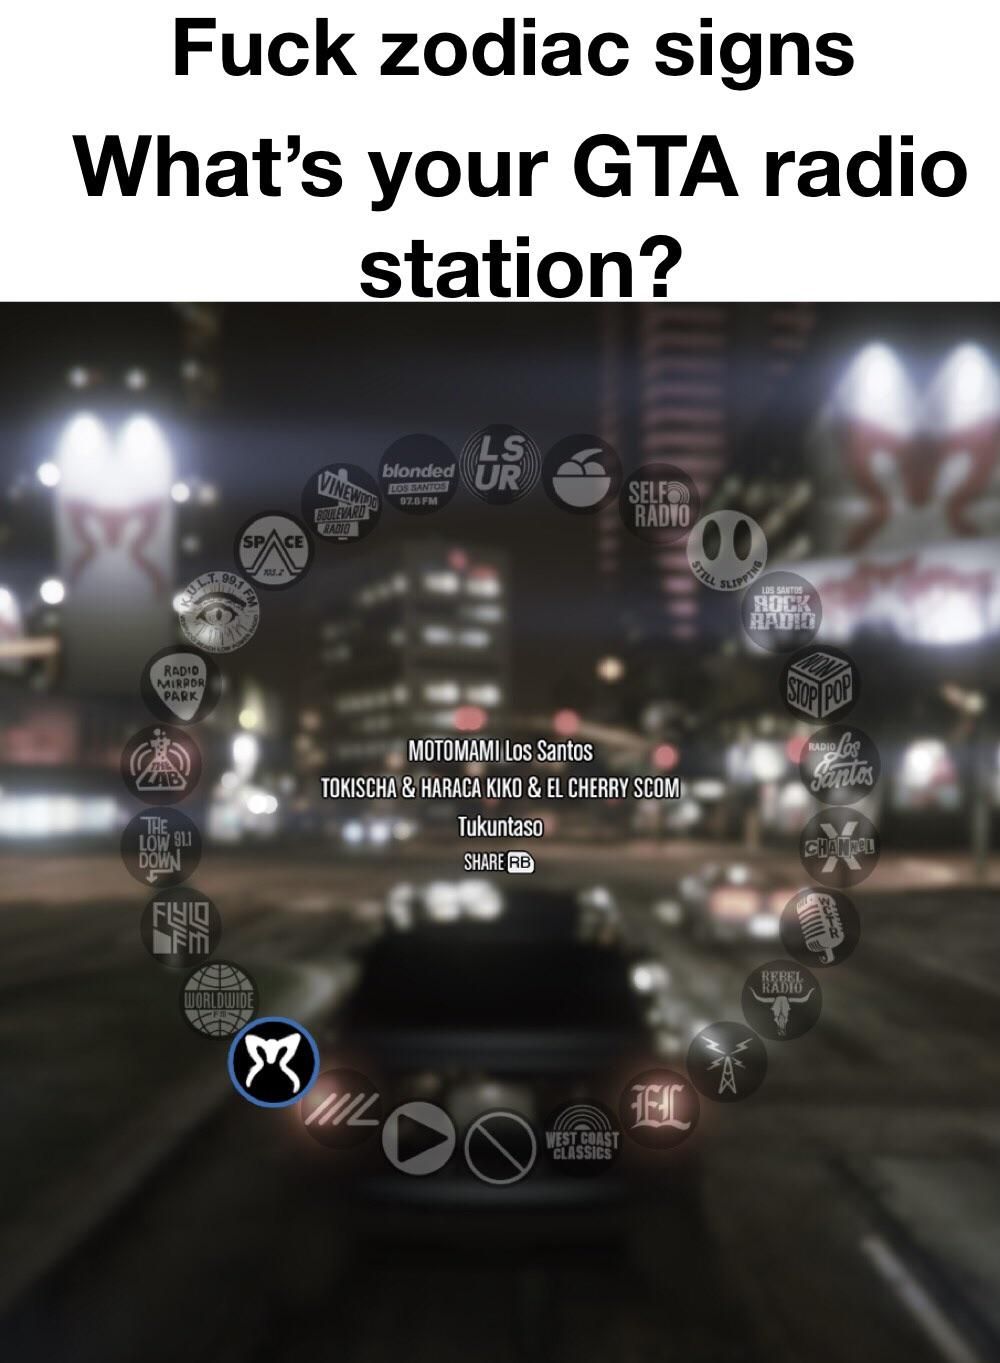 What’s your GTA radio station?